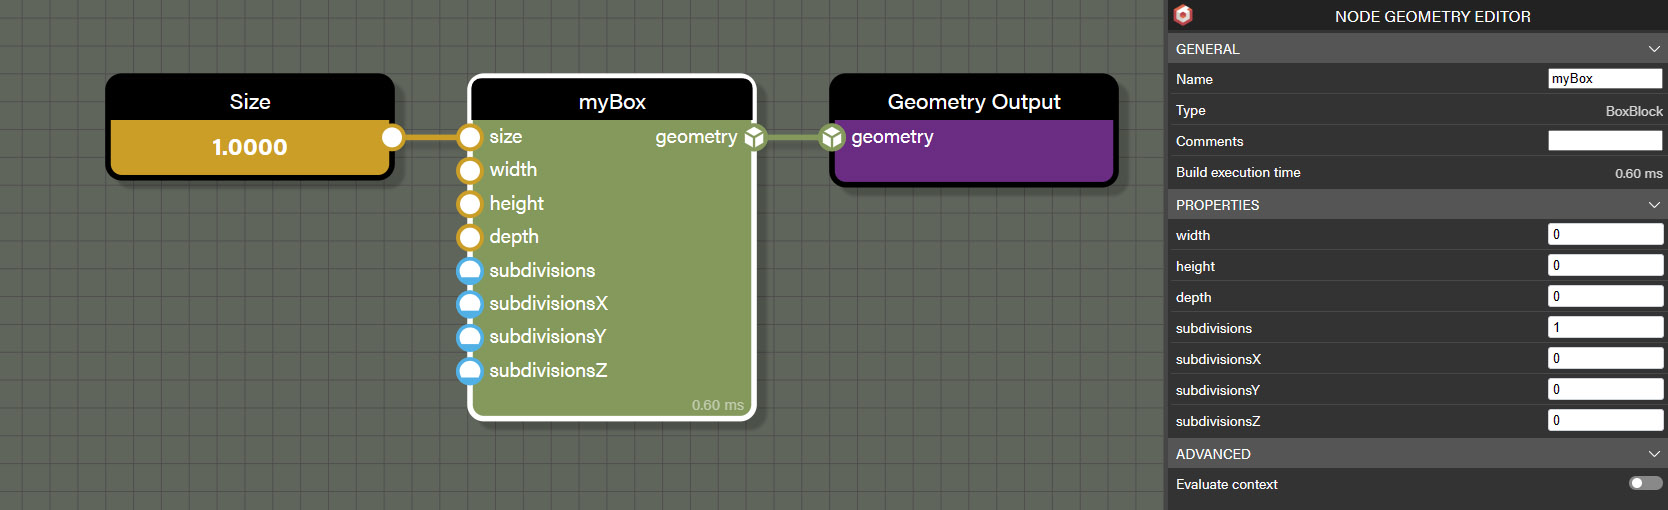 Selected nodes can have their name edited in the parameters panel.